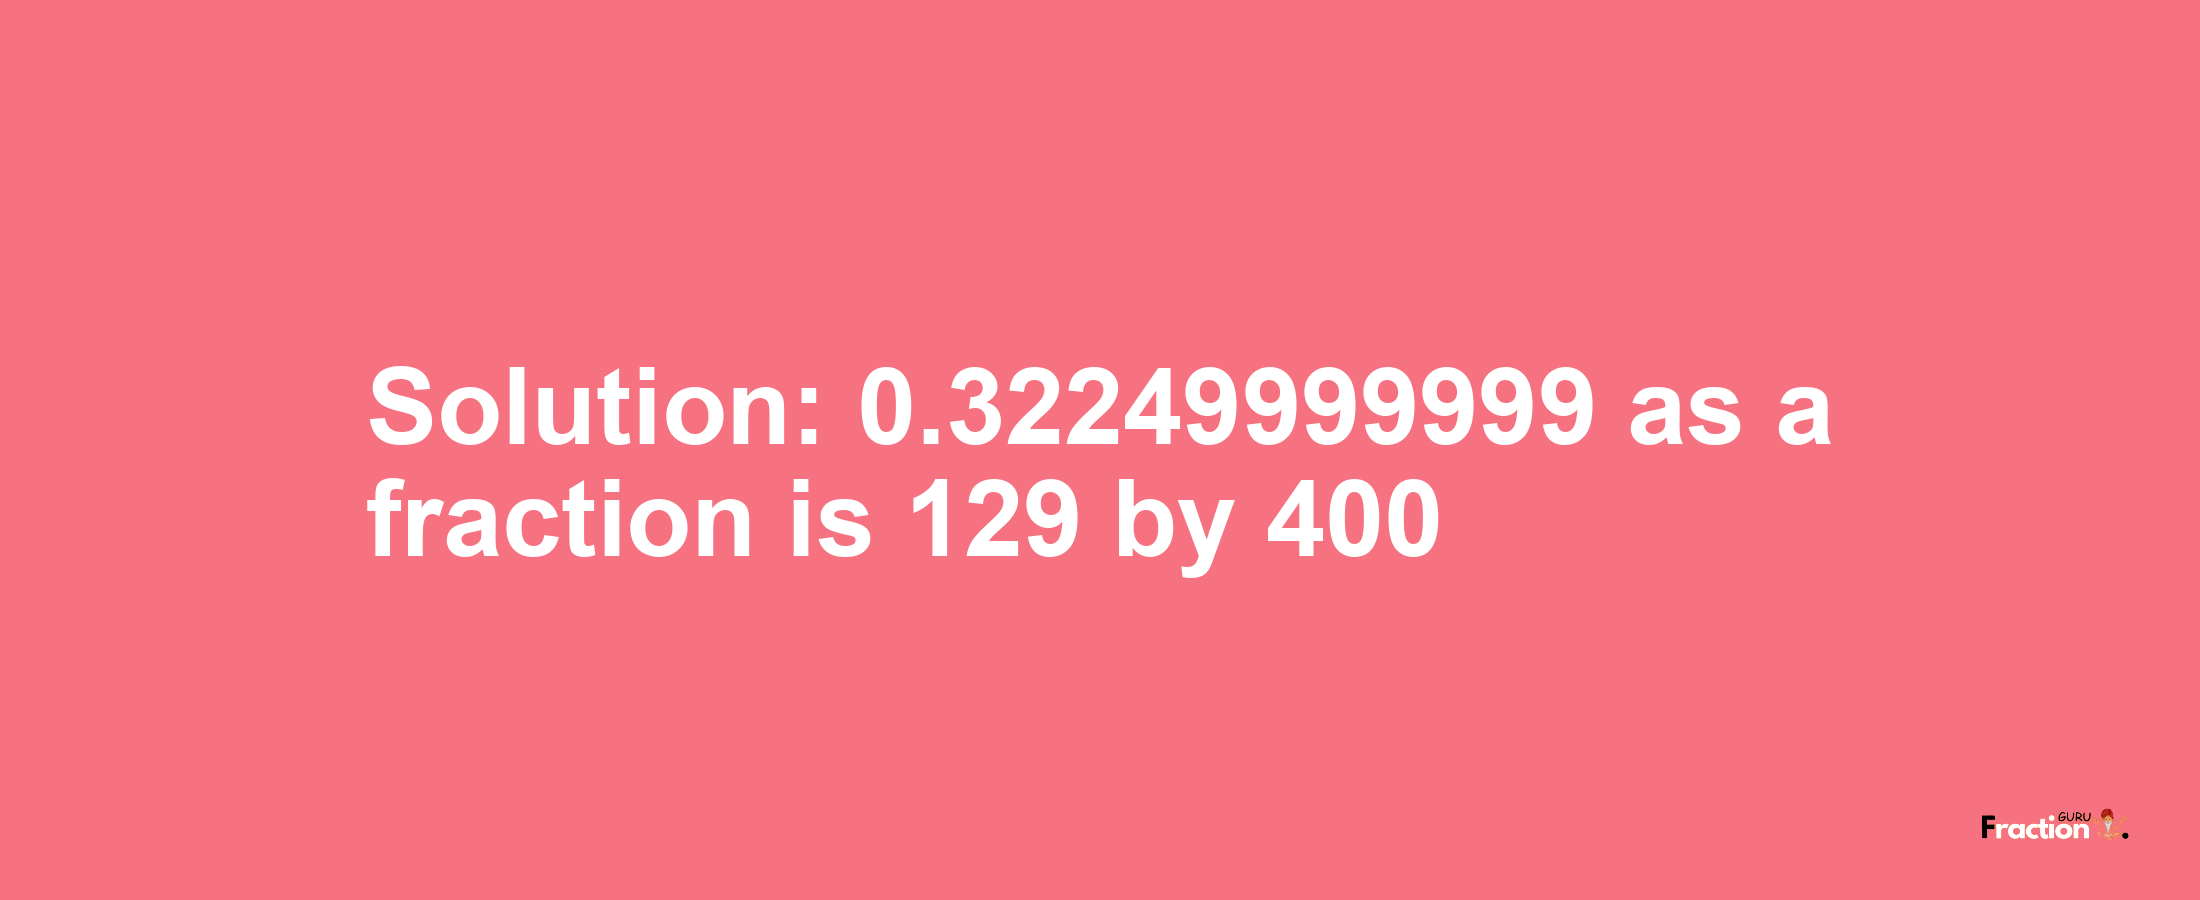 Solution:0.32249999999 as a fraction is 129/400